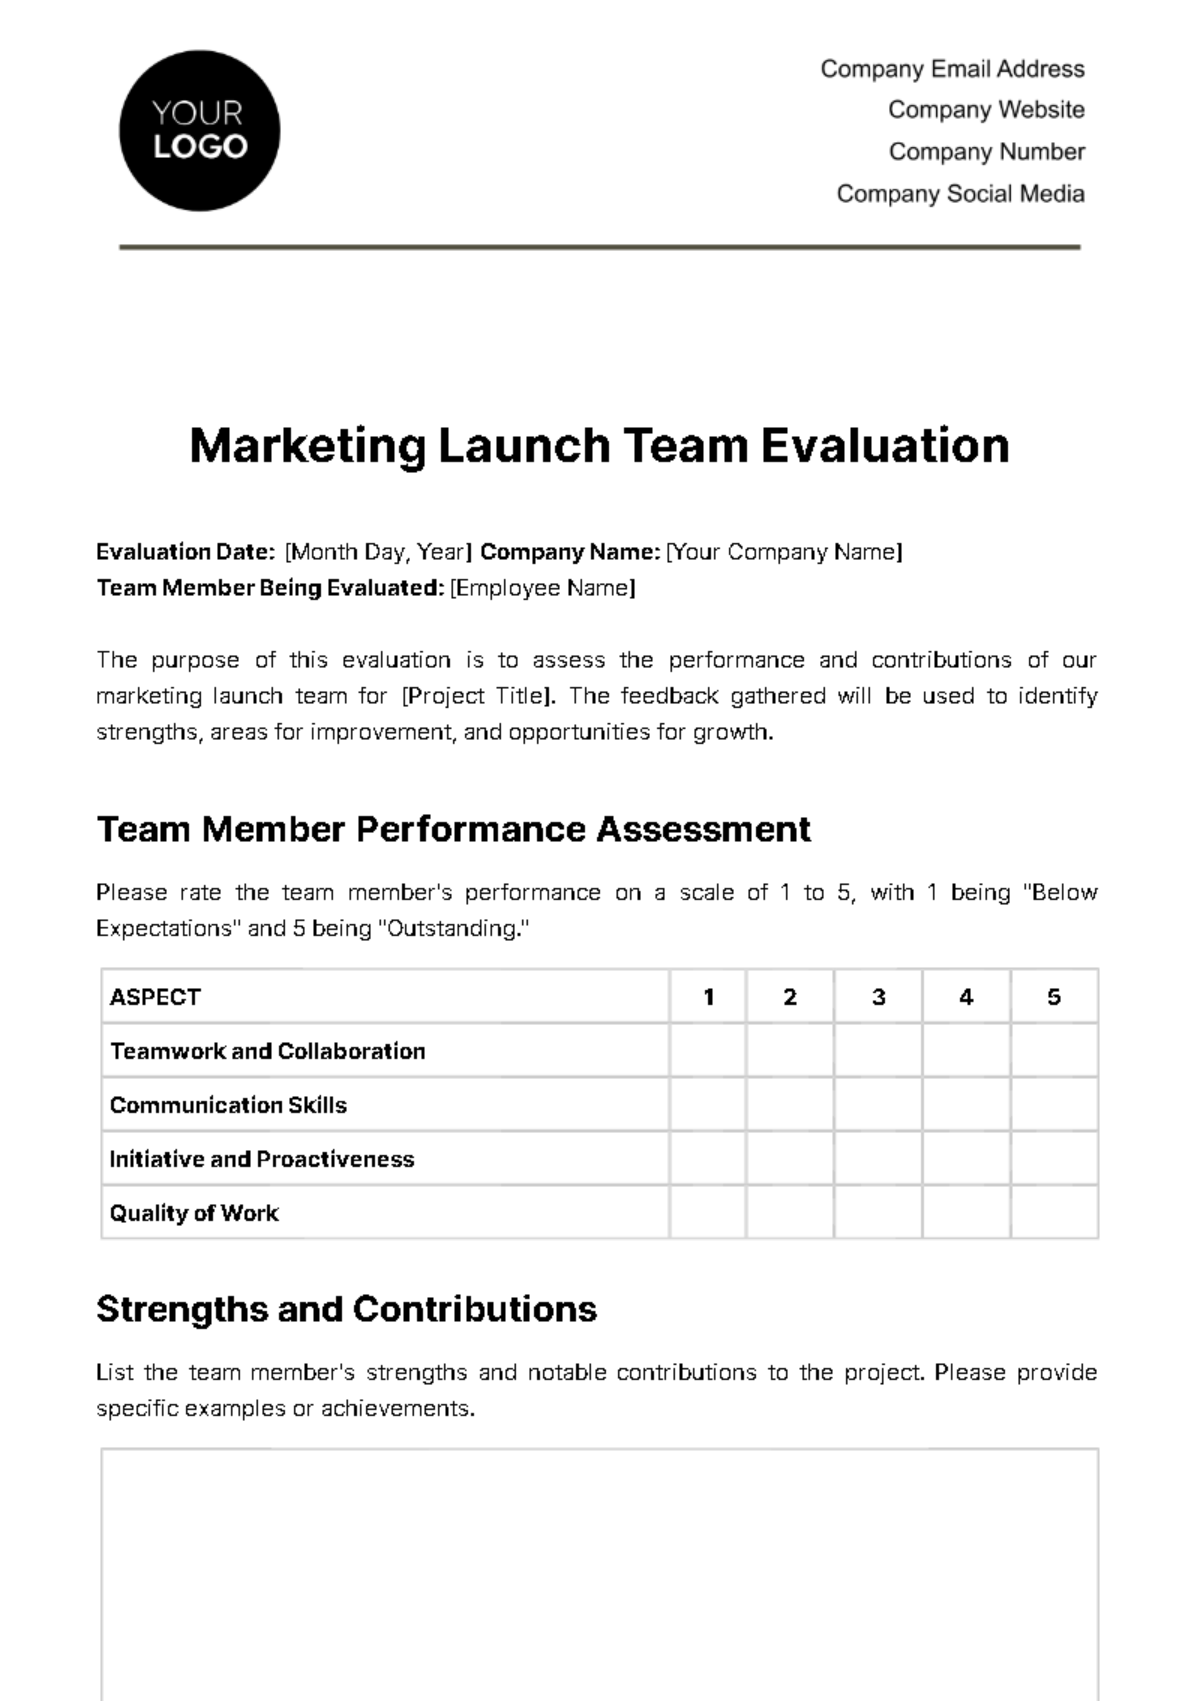 Free Marketing Launch Team Evaluation Template